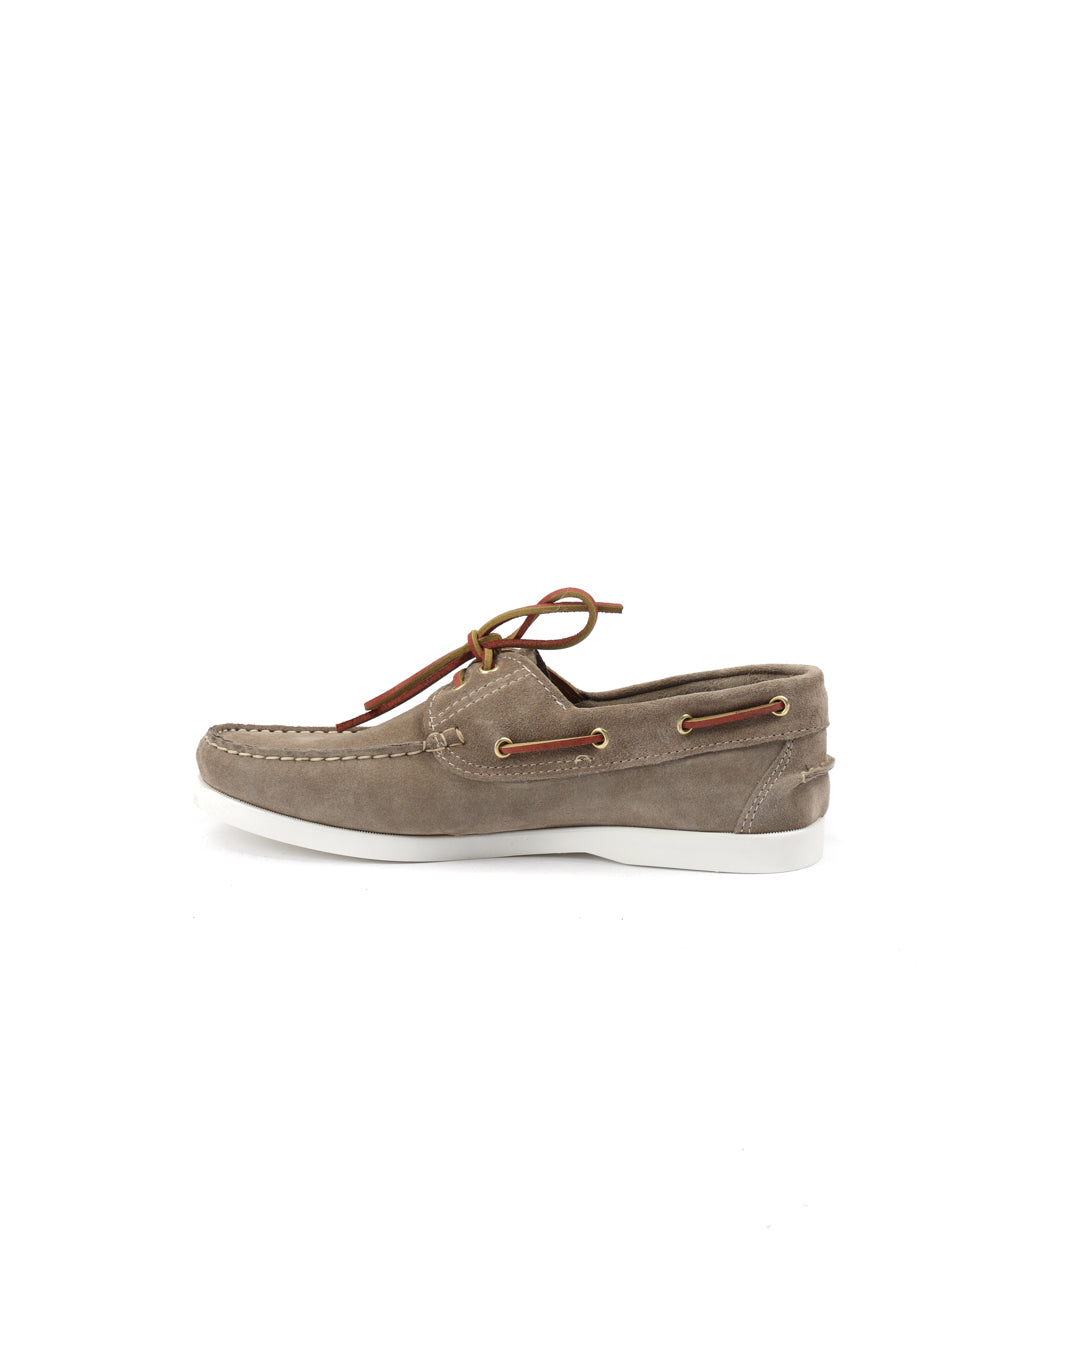 Jimmy - dove gray suede boat